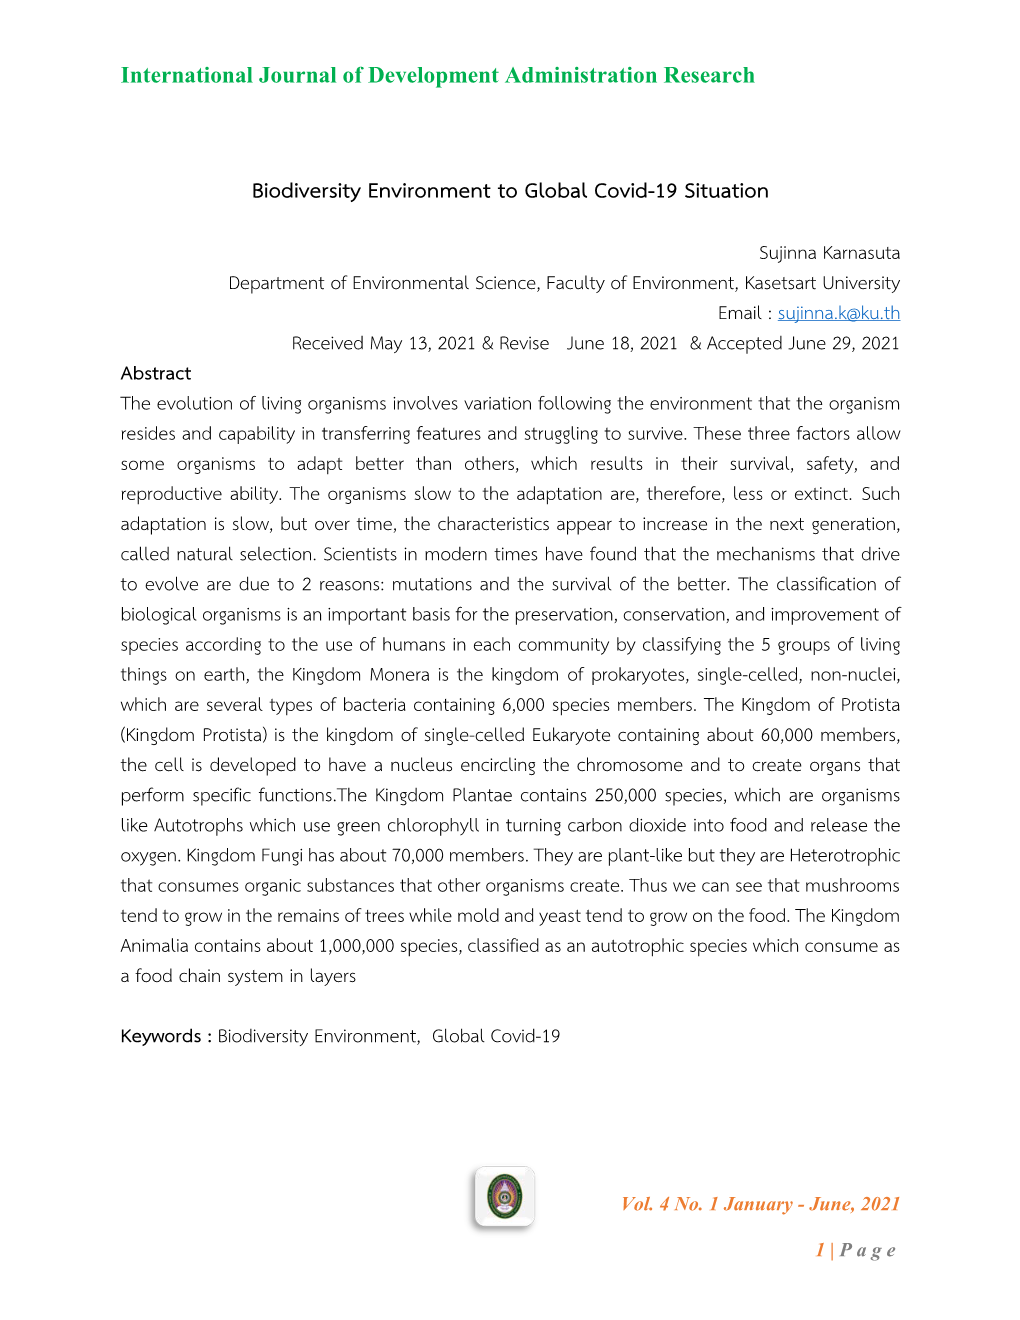 Biodiversity Environment to Global Covid-19 Situation